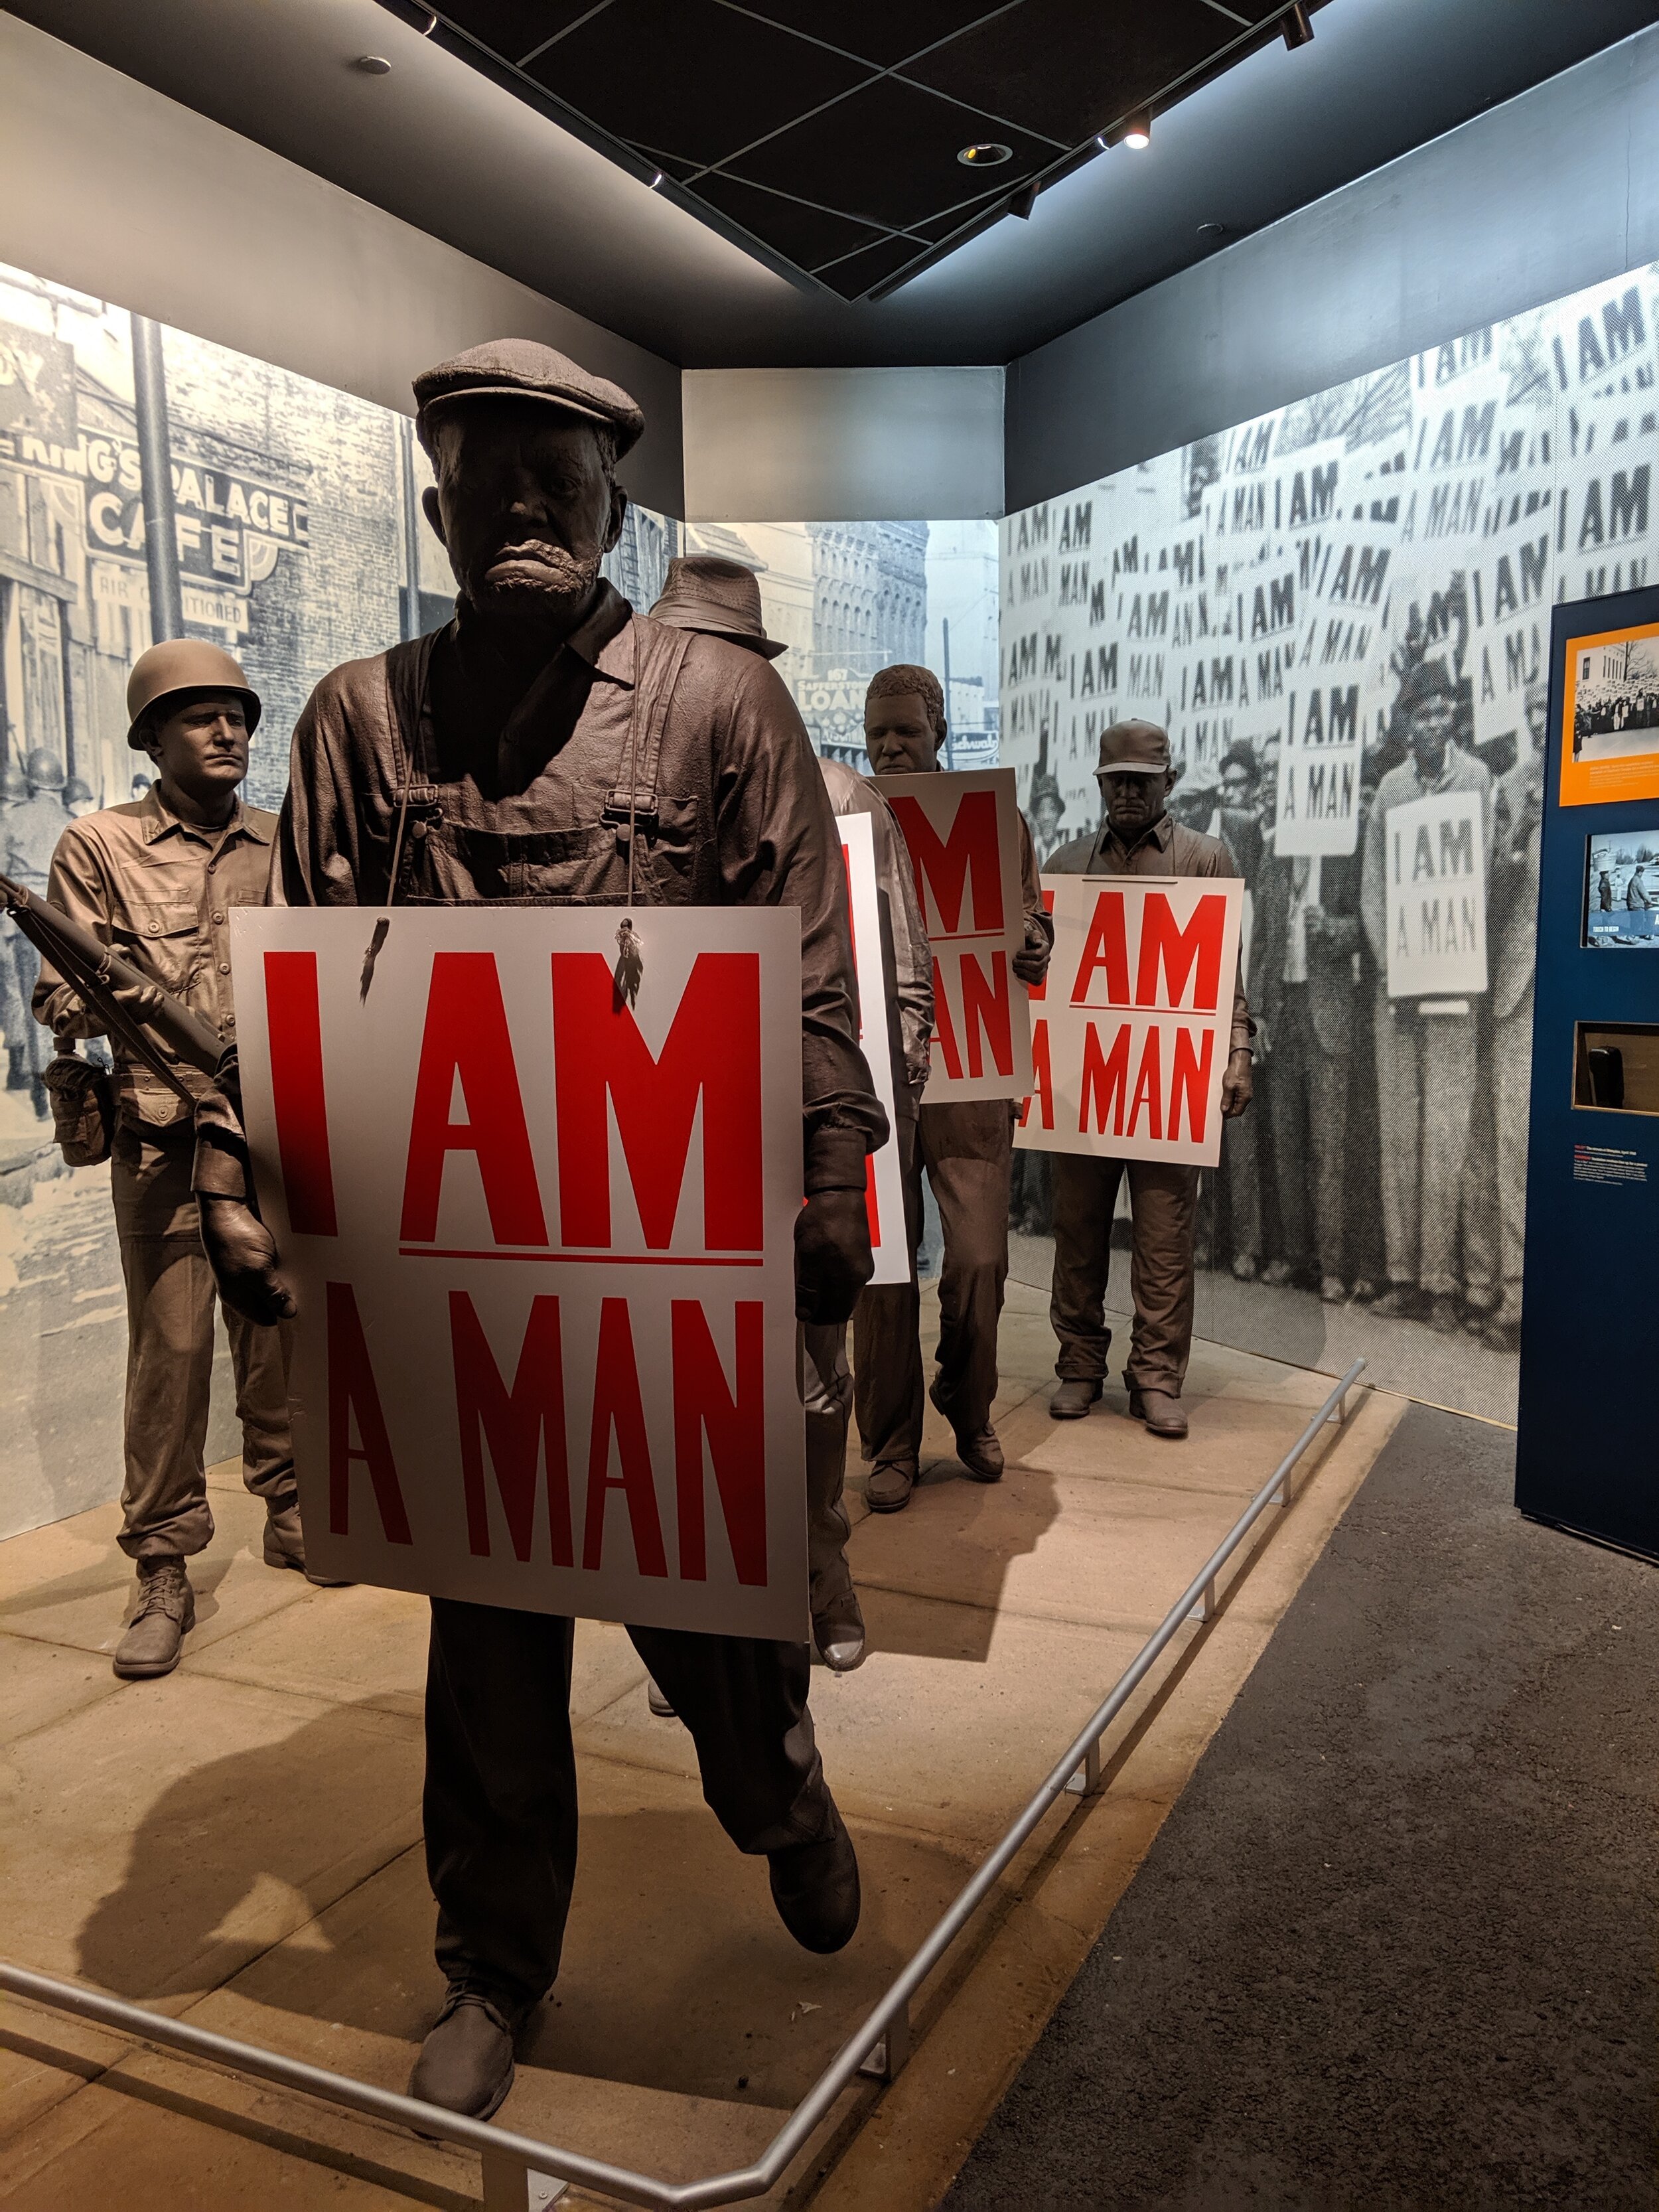  Sculpture at the Civil rights museum in Memphis of men holding signs saying “I am a man”. 